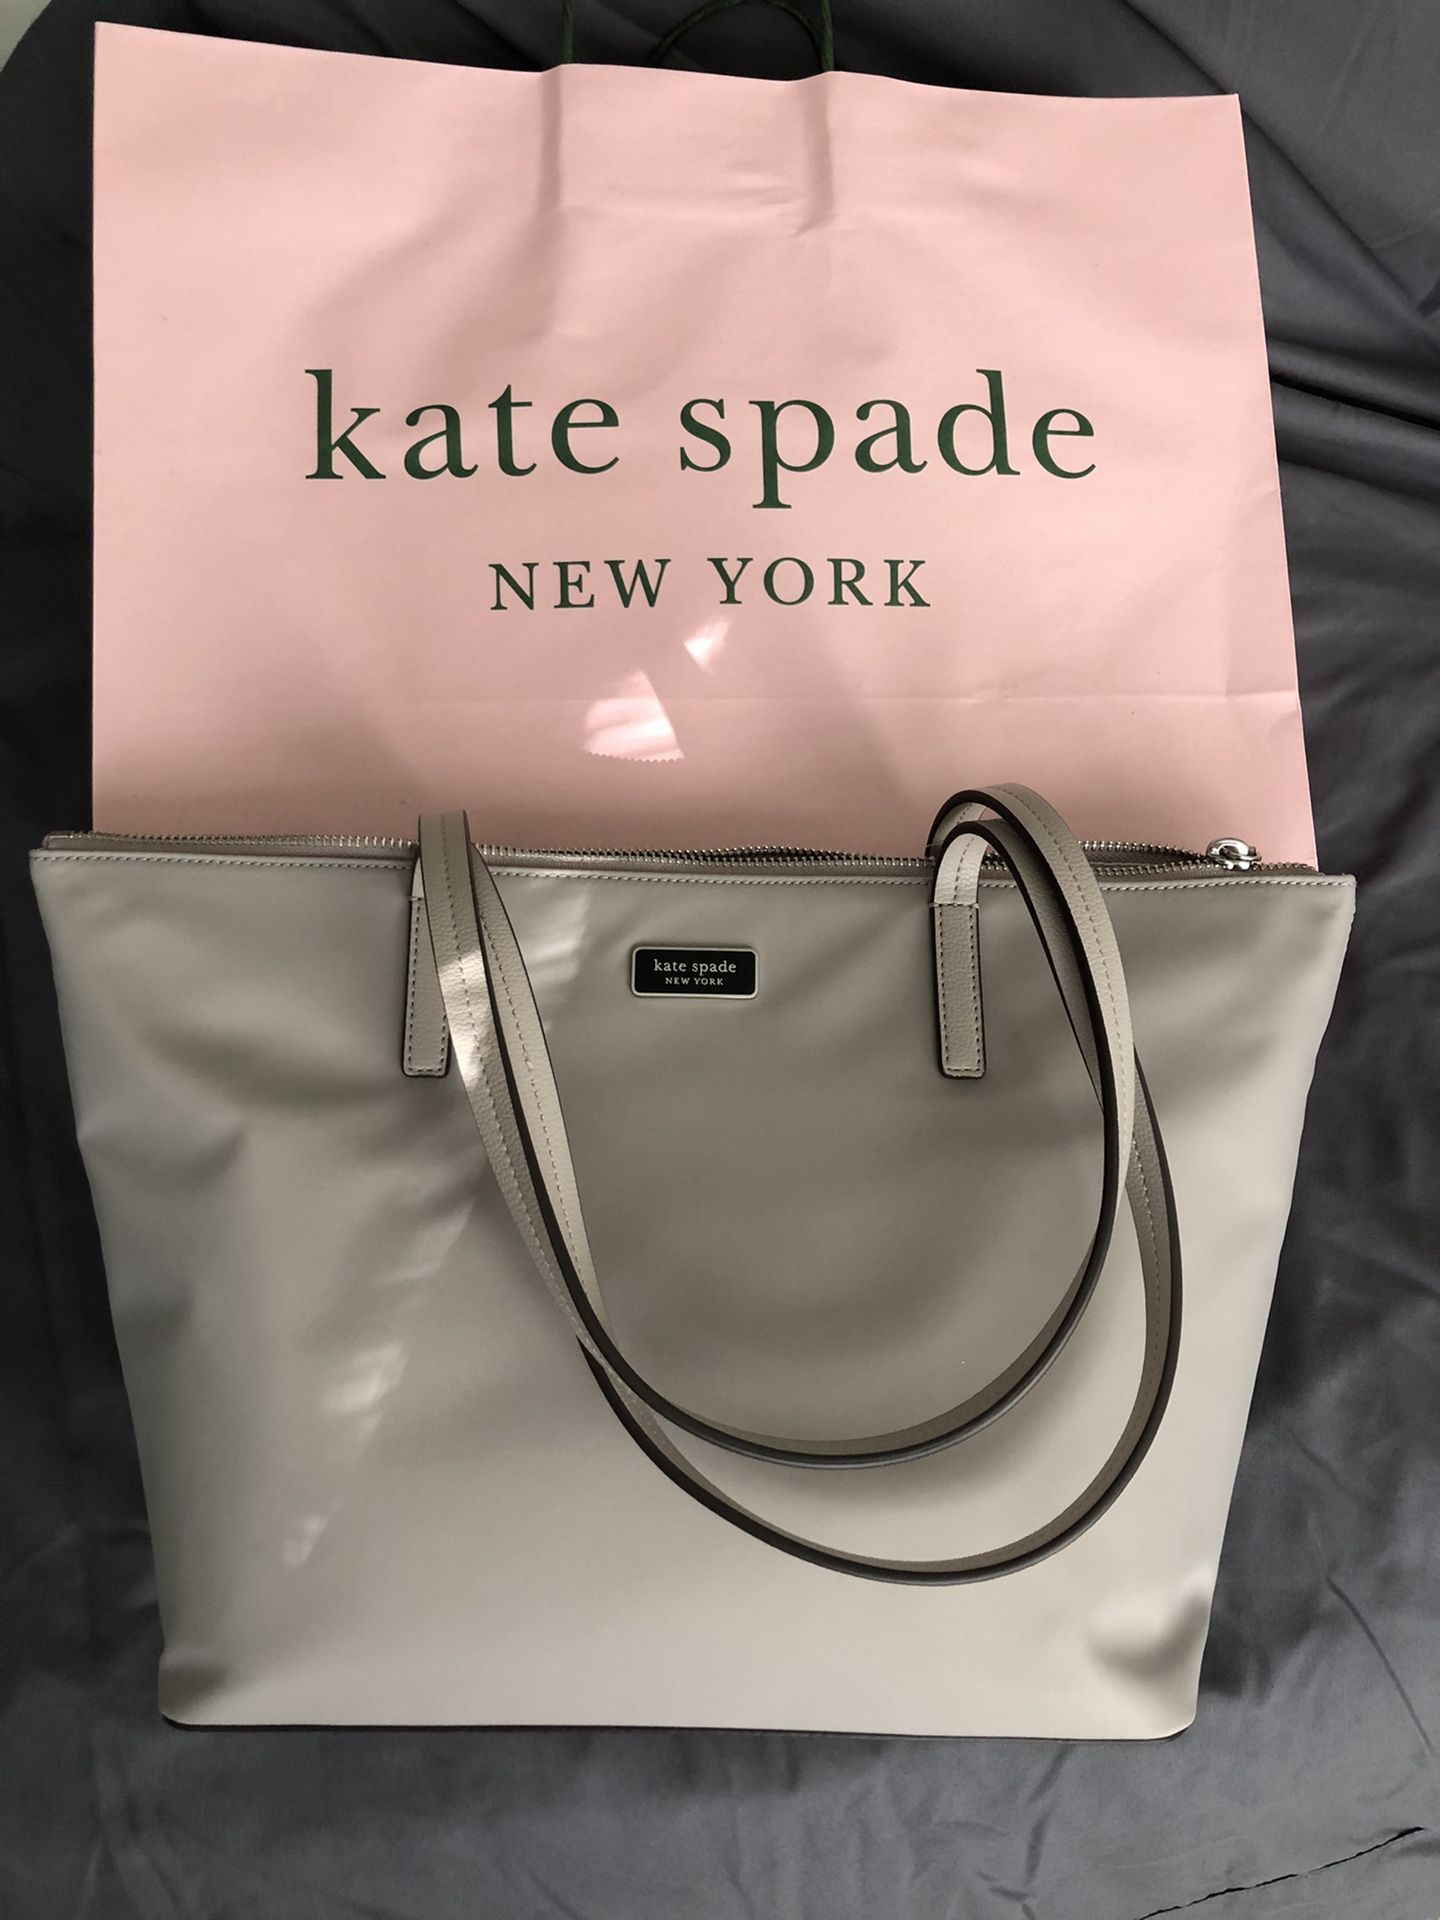 Brand new Kate Spade purse. Never used and has tags on it. Also have the receipt.